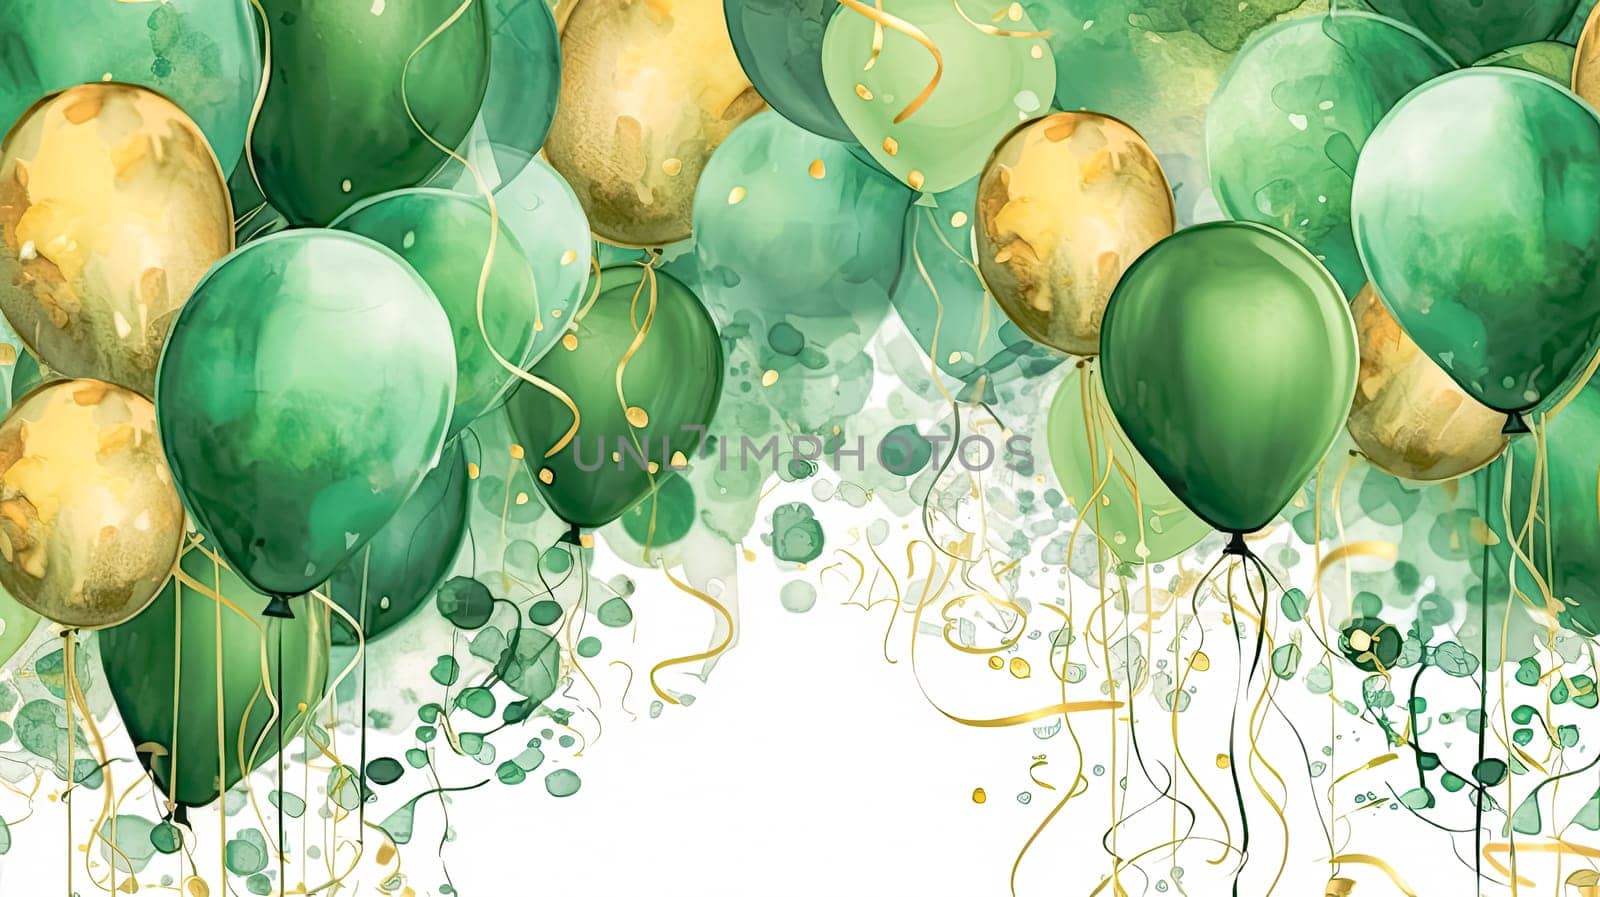 Lively Luck, Watercolor green and gold balloon, a festive symbol for St. Patricks Day celebrations, adding cheer